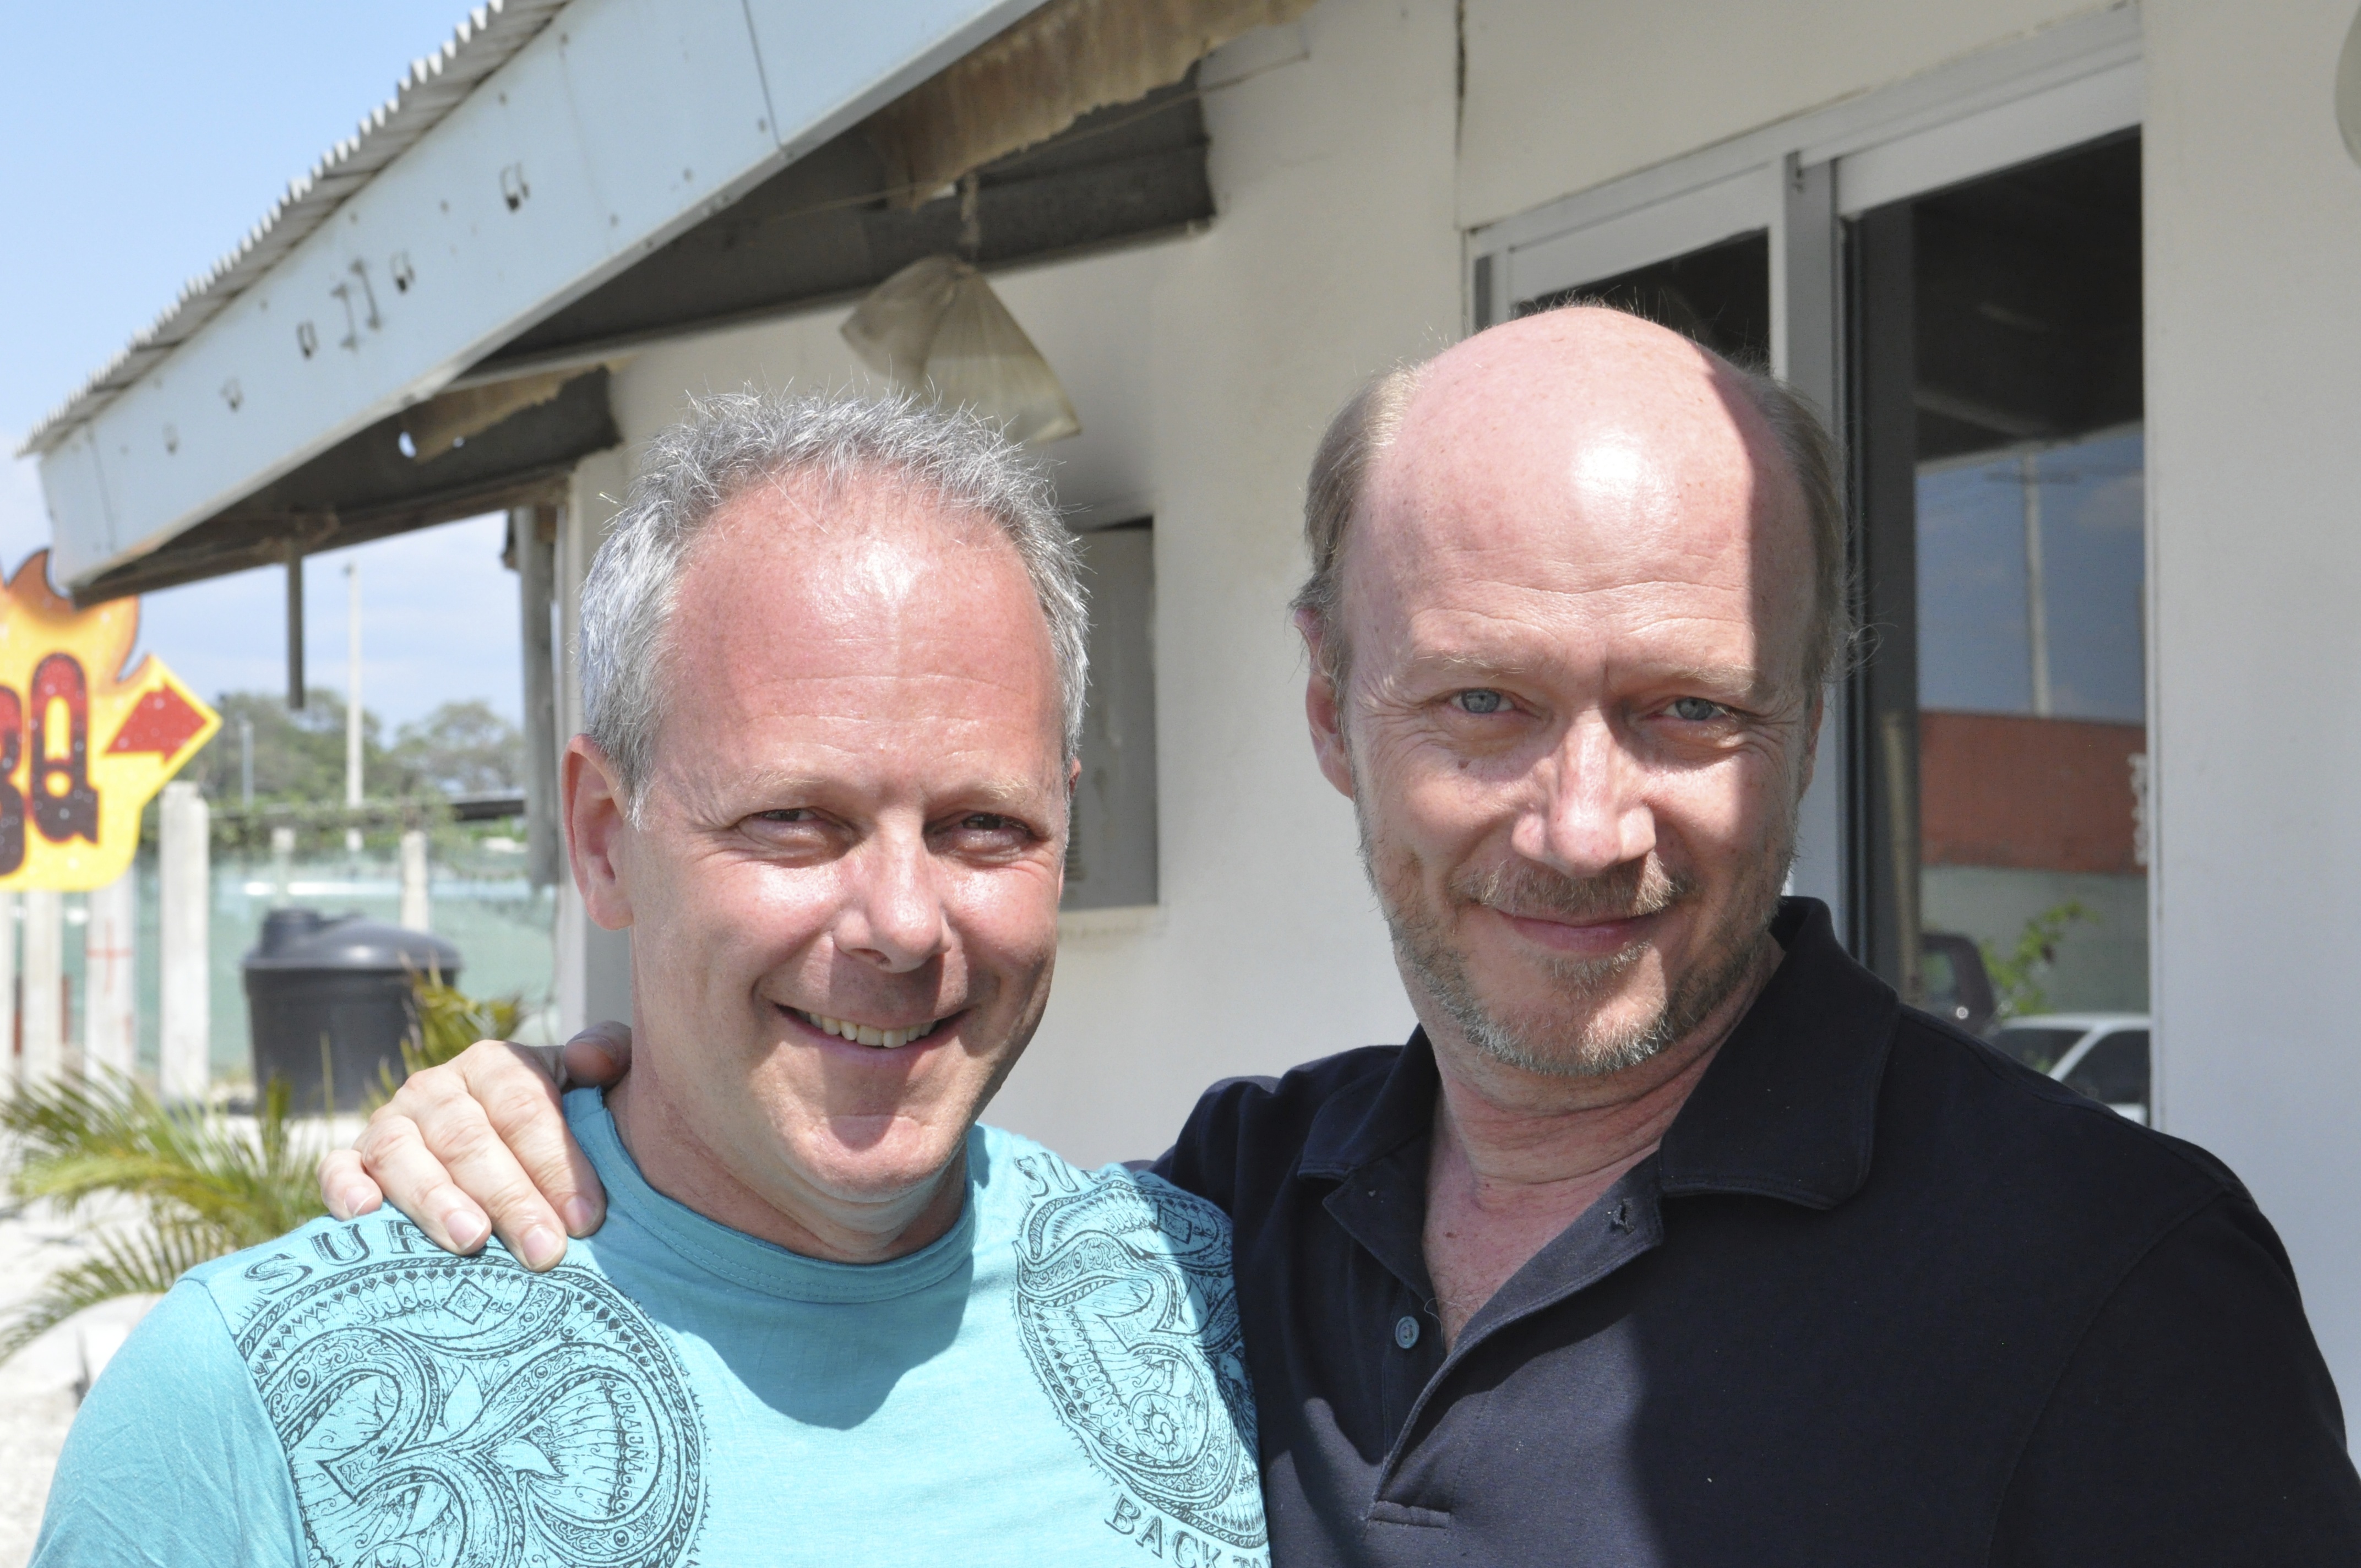 Gareth Seltzer and Paul Haggis - Fundraiser for Artists for Peace and Justice